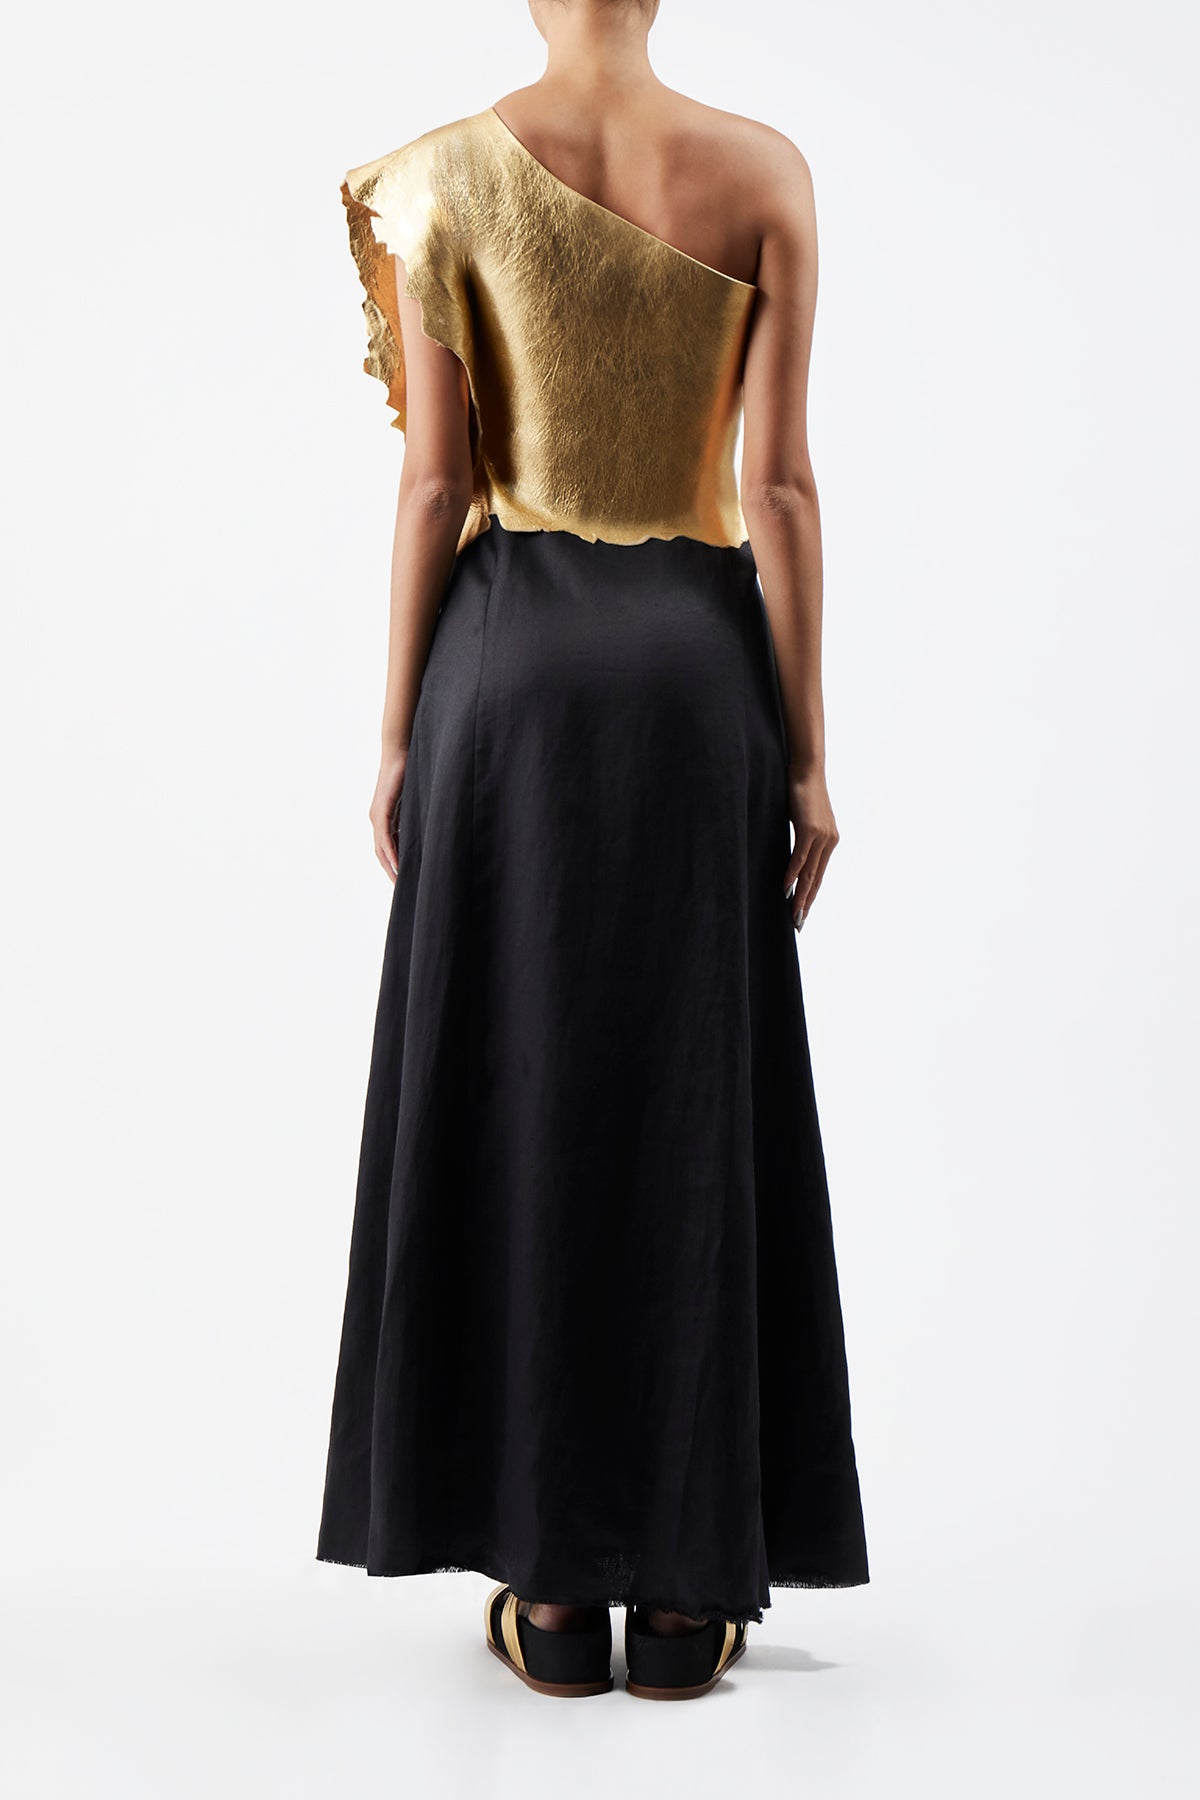 Cleis Dress in Silk and Gold Metallic Leather